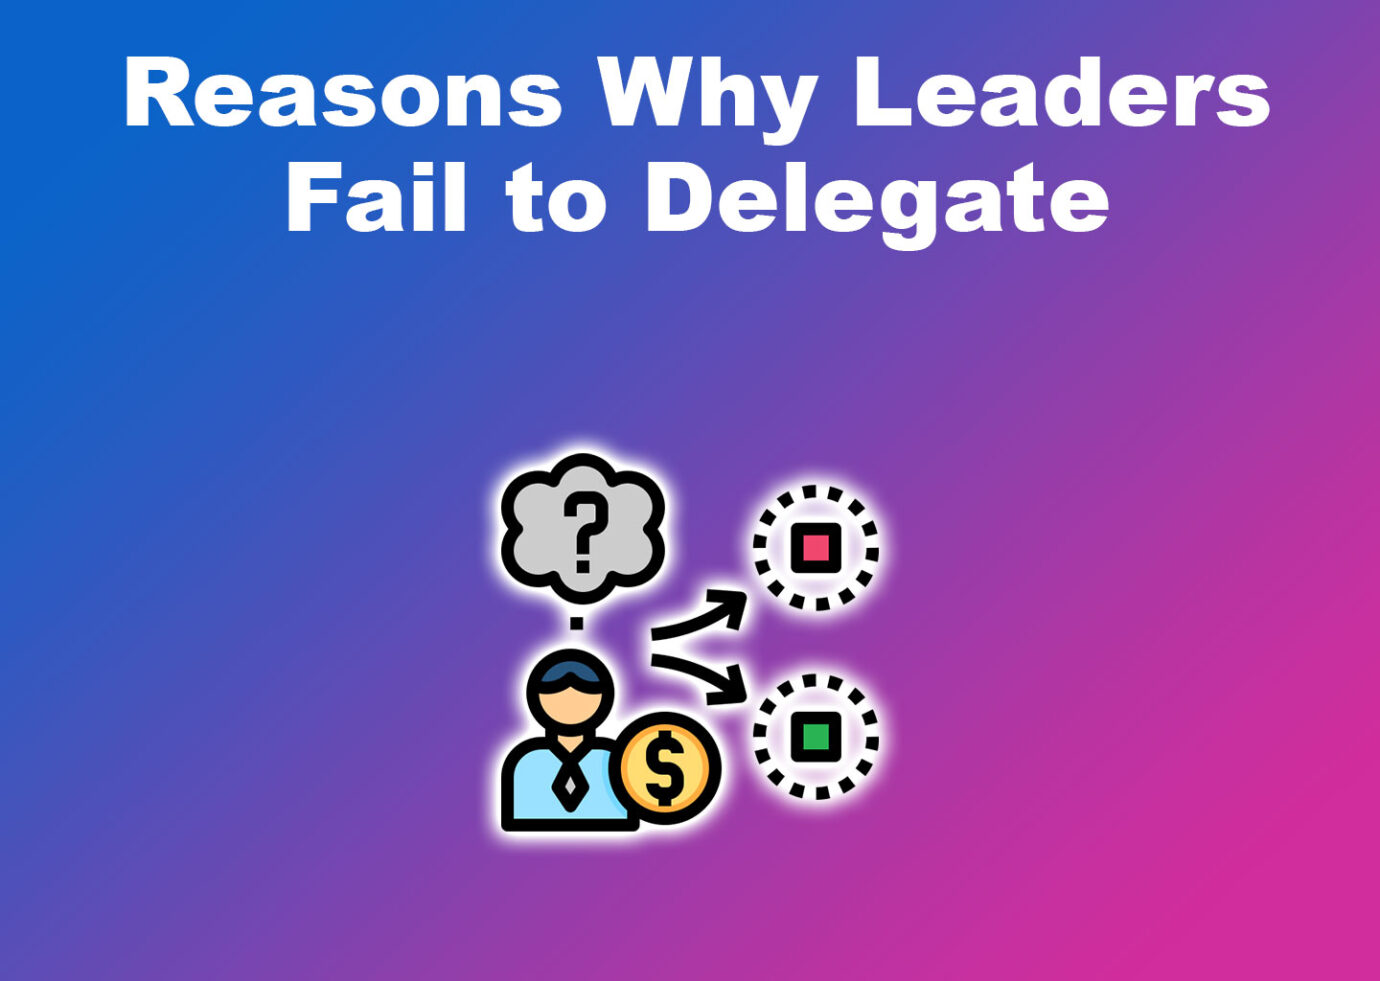 Reasons Why Leaders Fail to Delegate